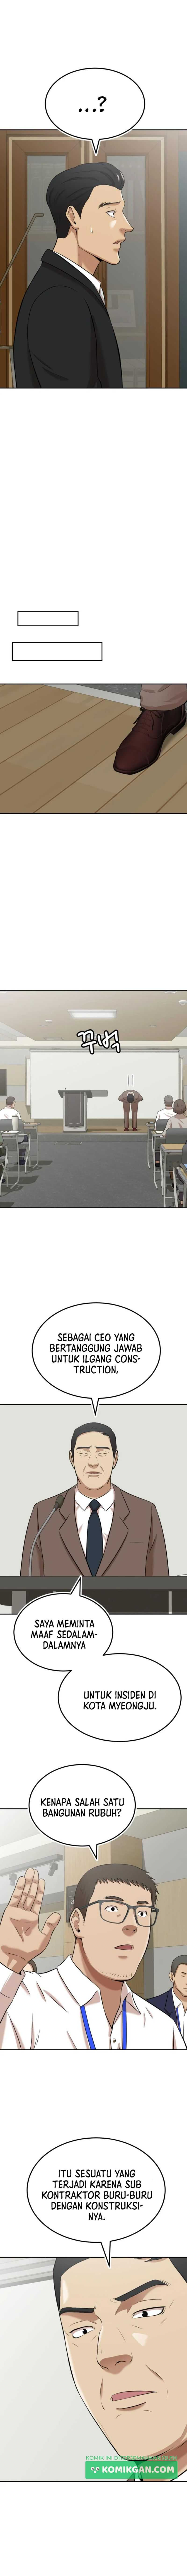 Company Grievance Squad Chapter 8